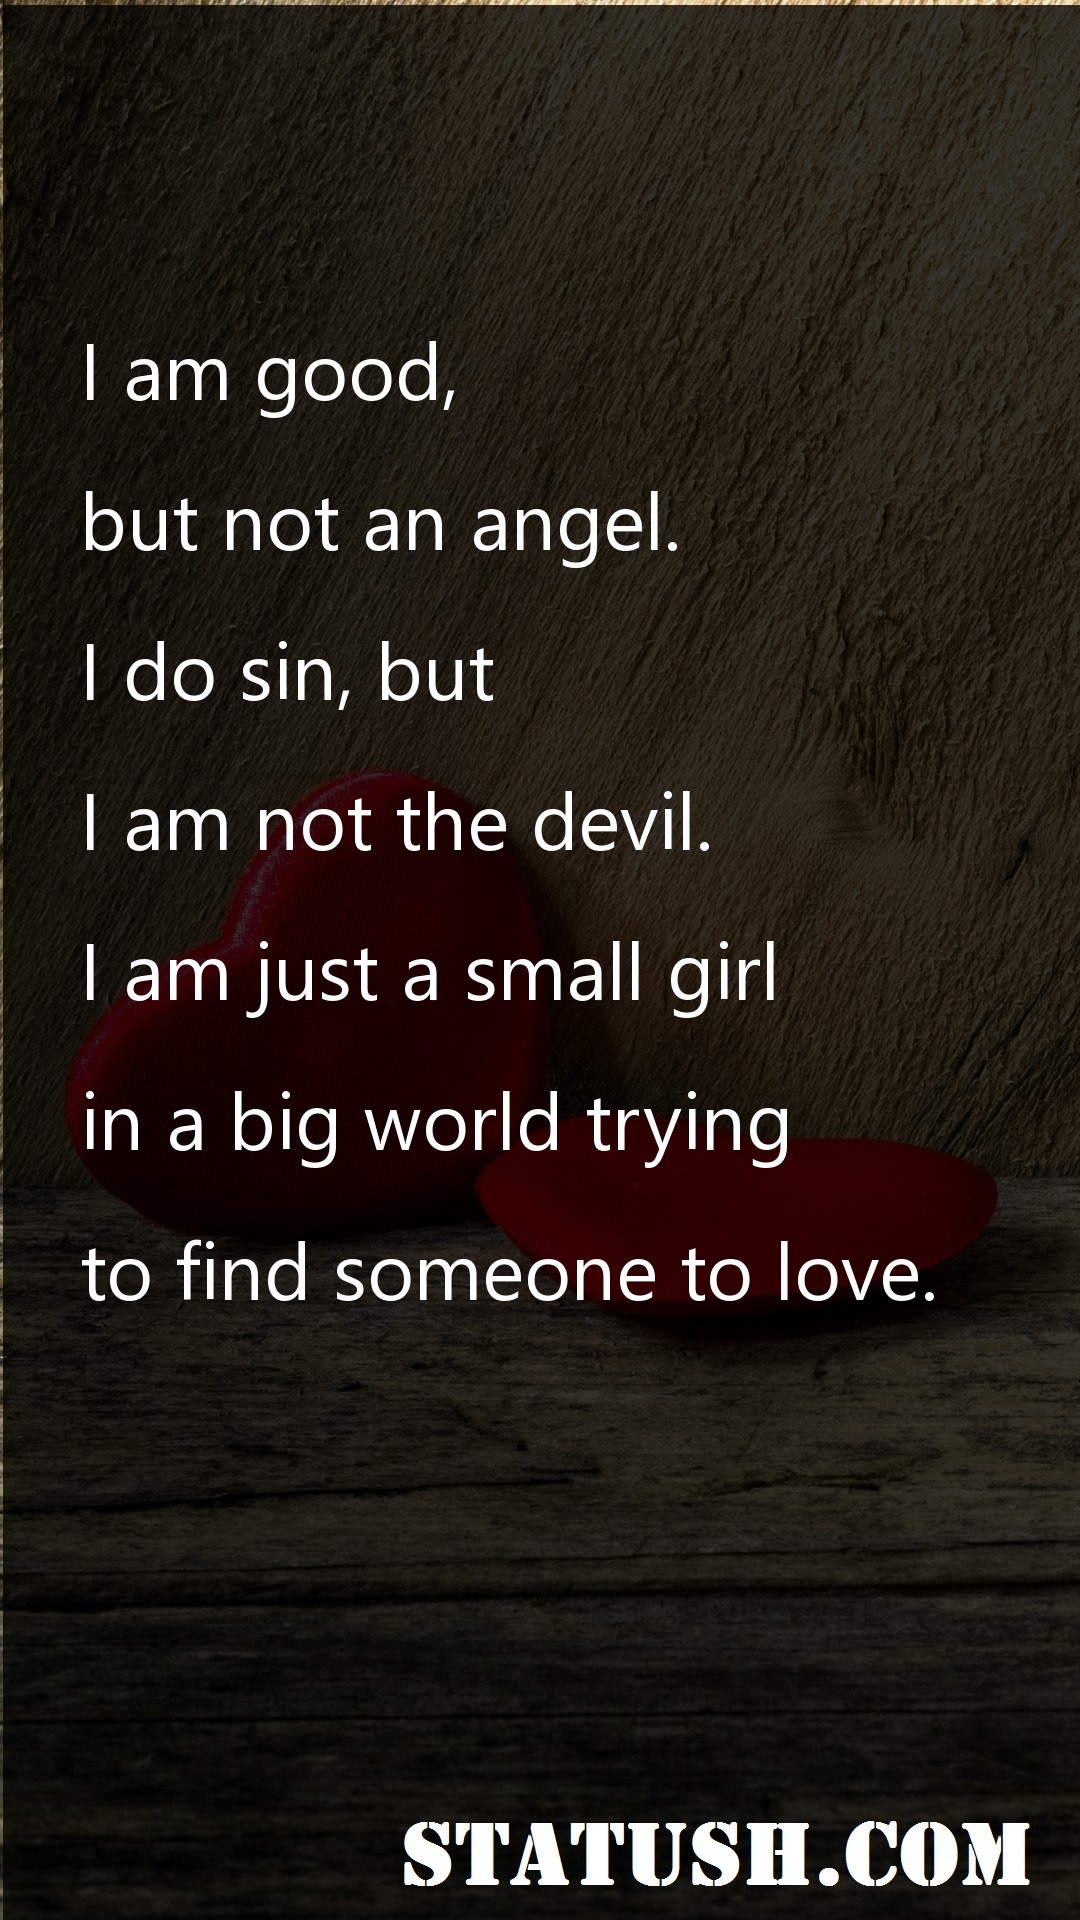 I am good but not an angel - Love Quotes at statush.com